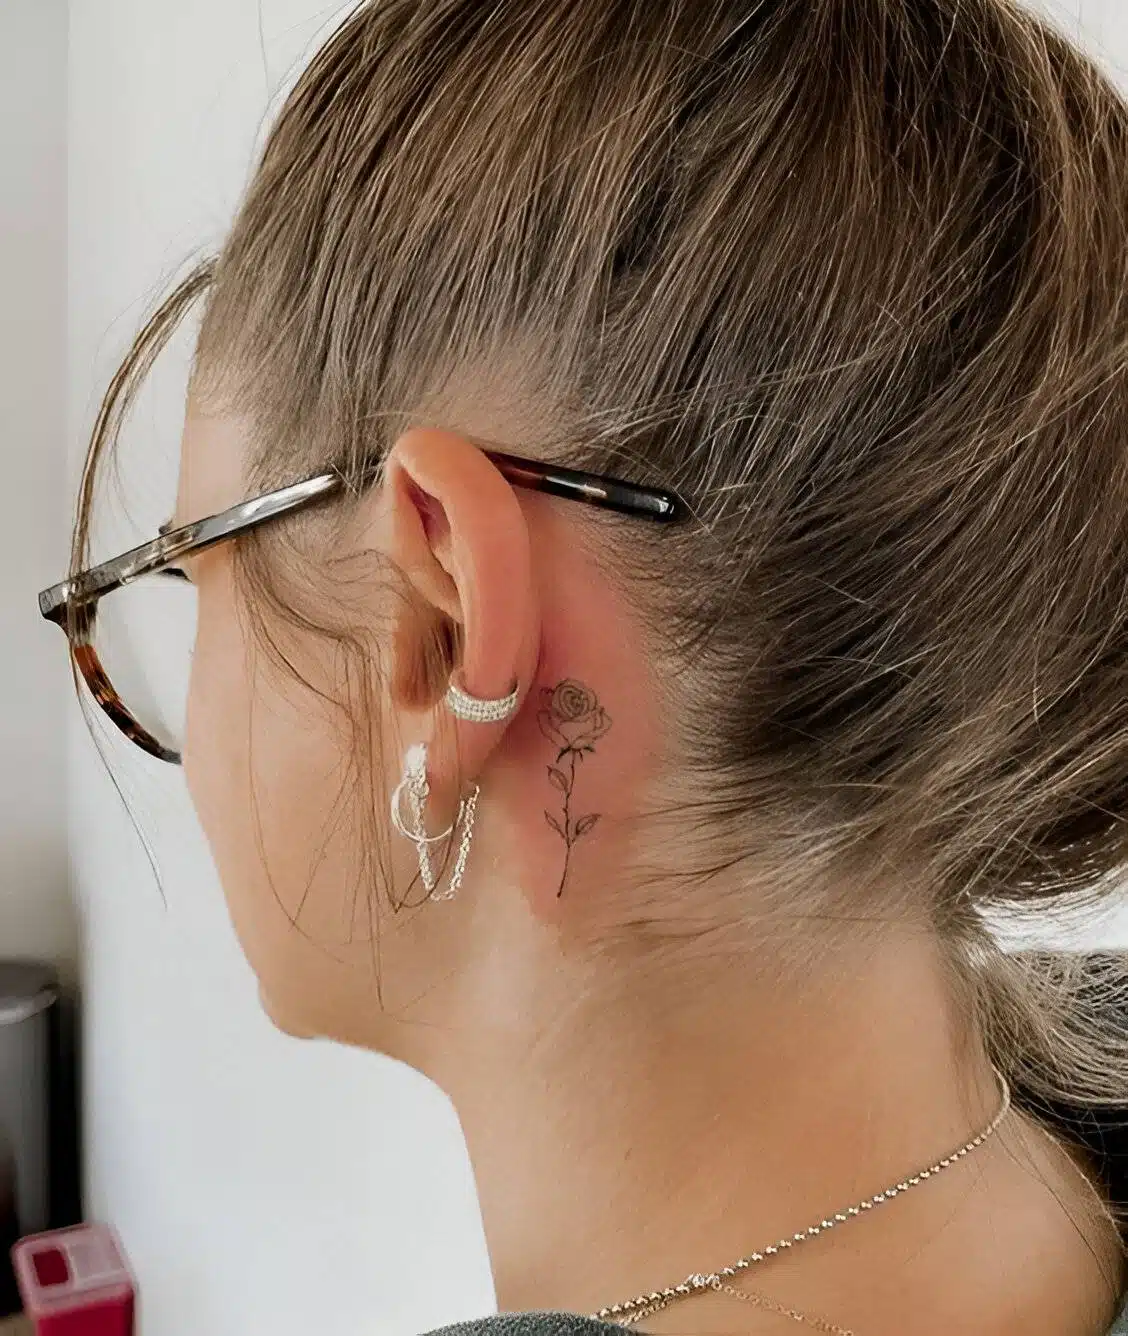 25 Low-key Stunning Behind The Ear Tattoos To Get ASAP - 175